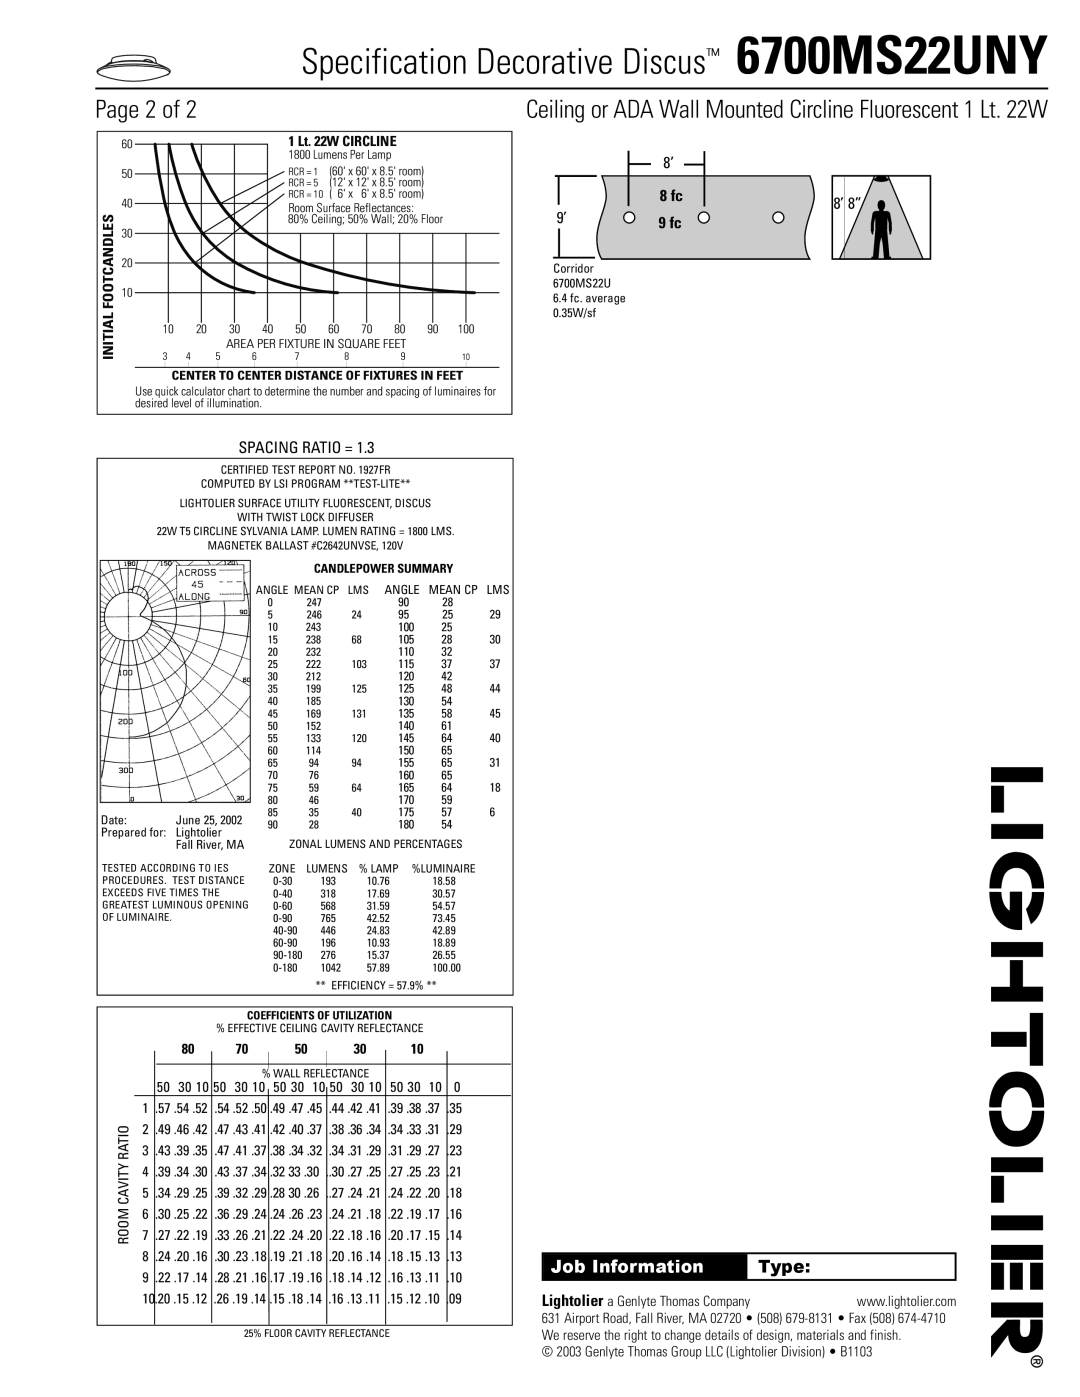 Lightolier manual Page 2 of, Specification Decorative Discus 6700MS22UNY, Job Information, Type, 8 fc, Spacing Ratio = 